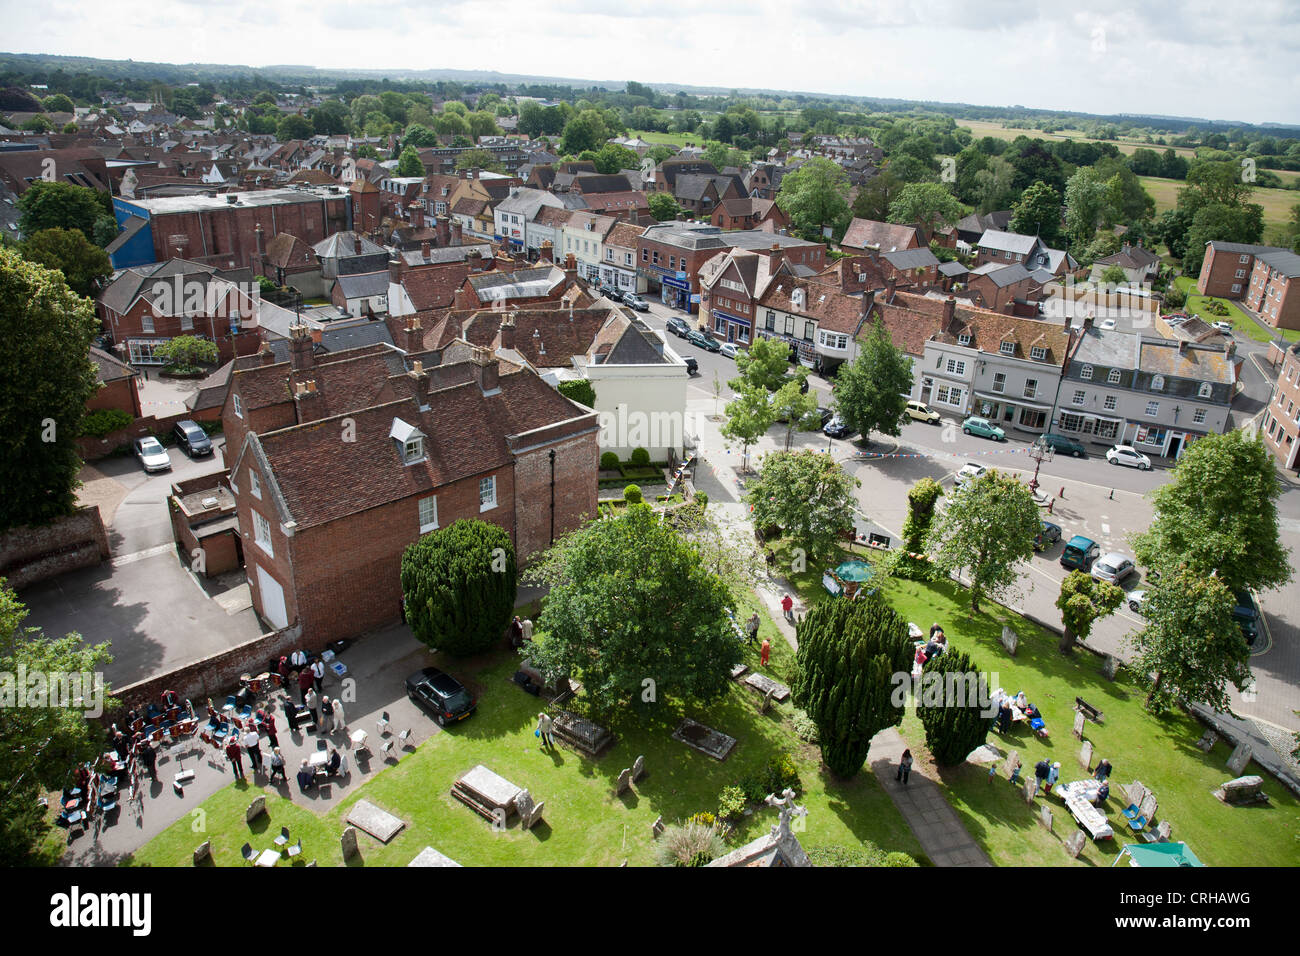 Ariel view of Ringwood taken from the church tower Stock Photo